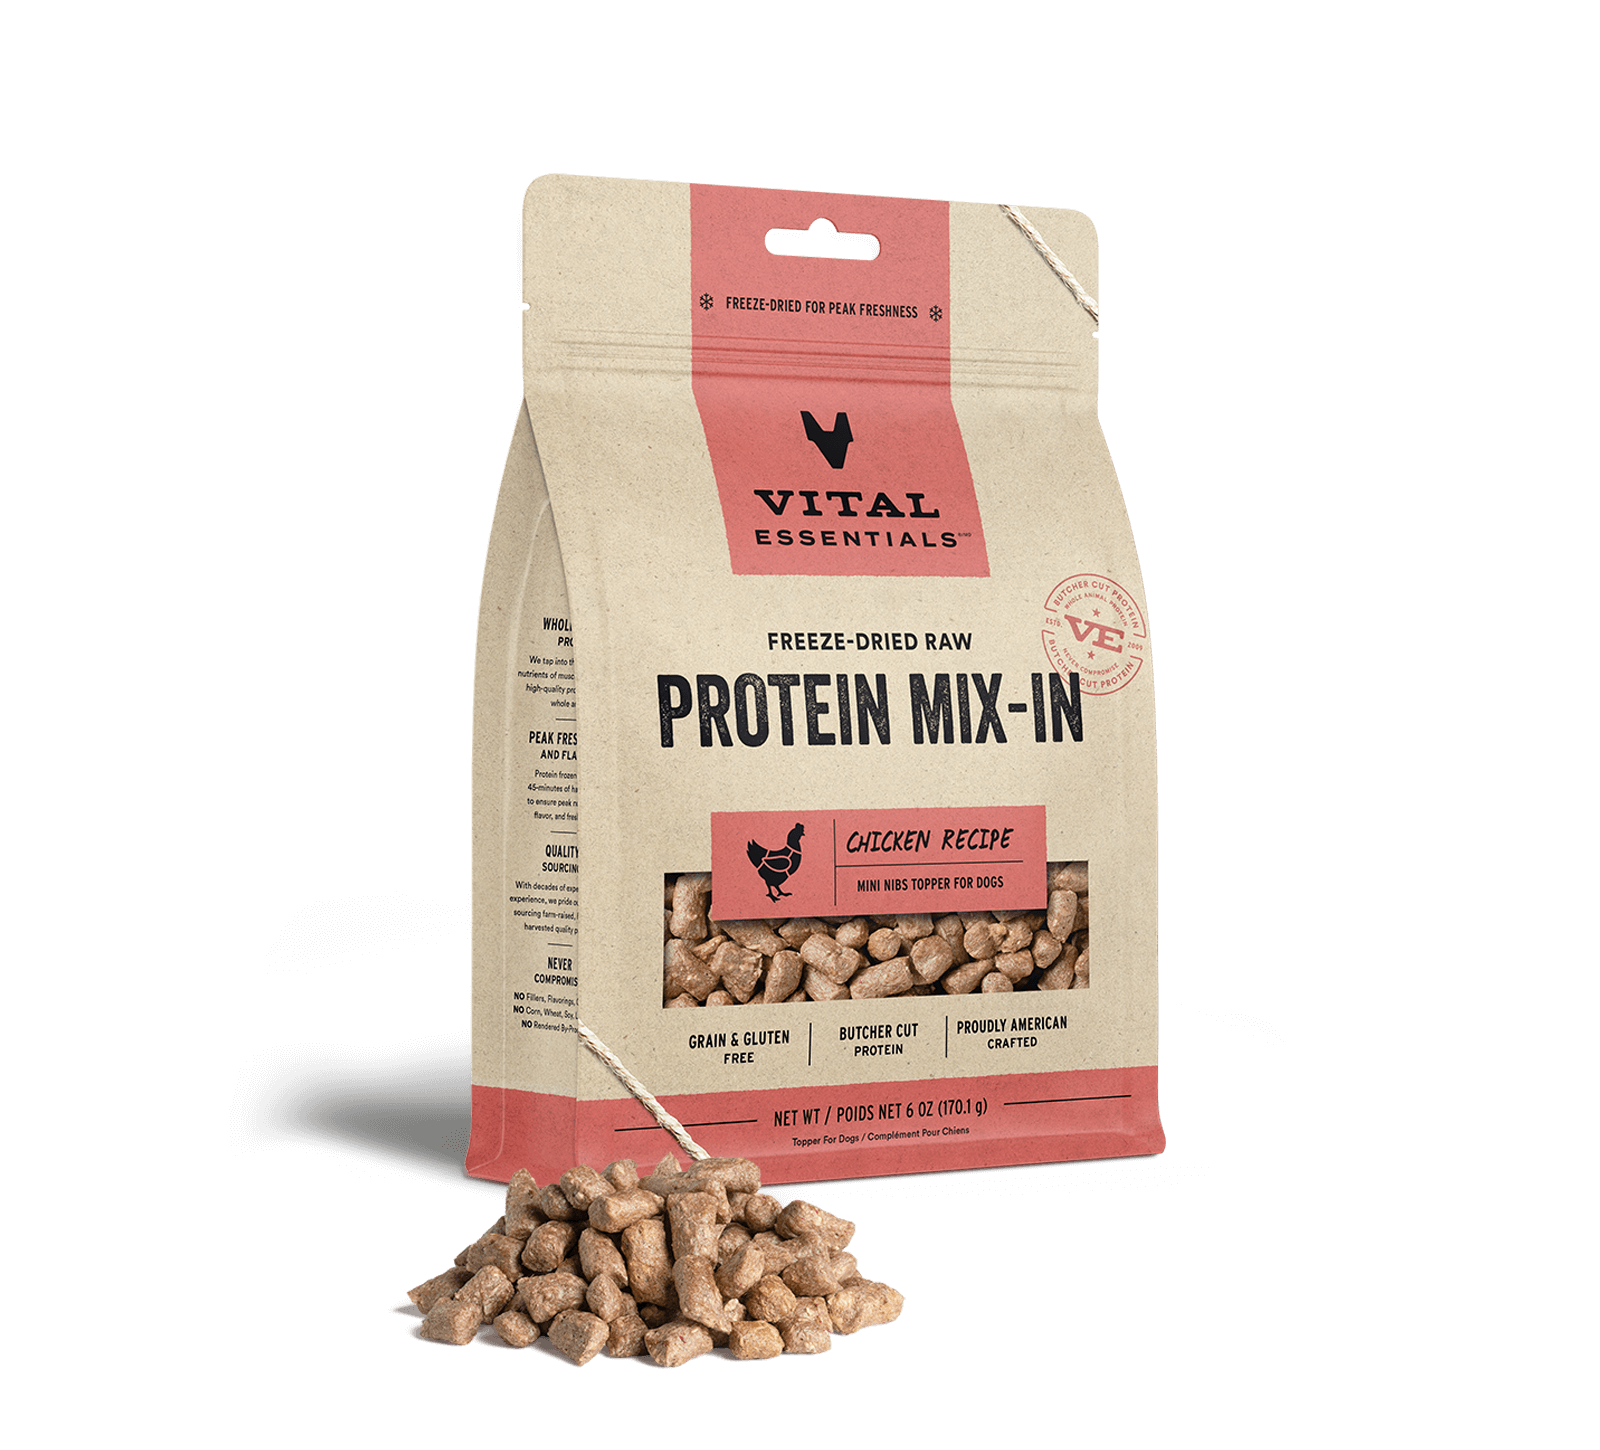 Vital Essentials Freeze-Dried Raw Protein Mix-In Chicken Recipe Mini Nibs Topper for Dogs, 6 oz - Items on Sale Now